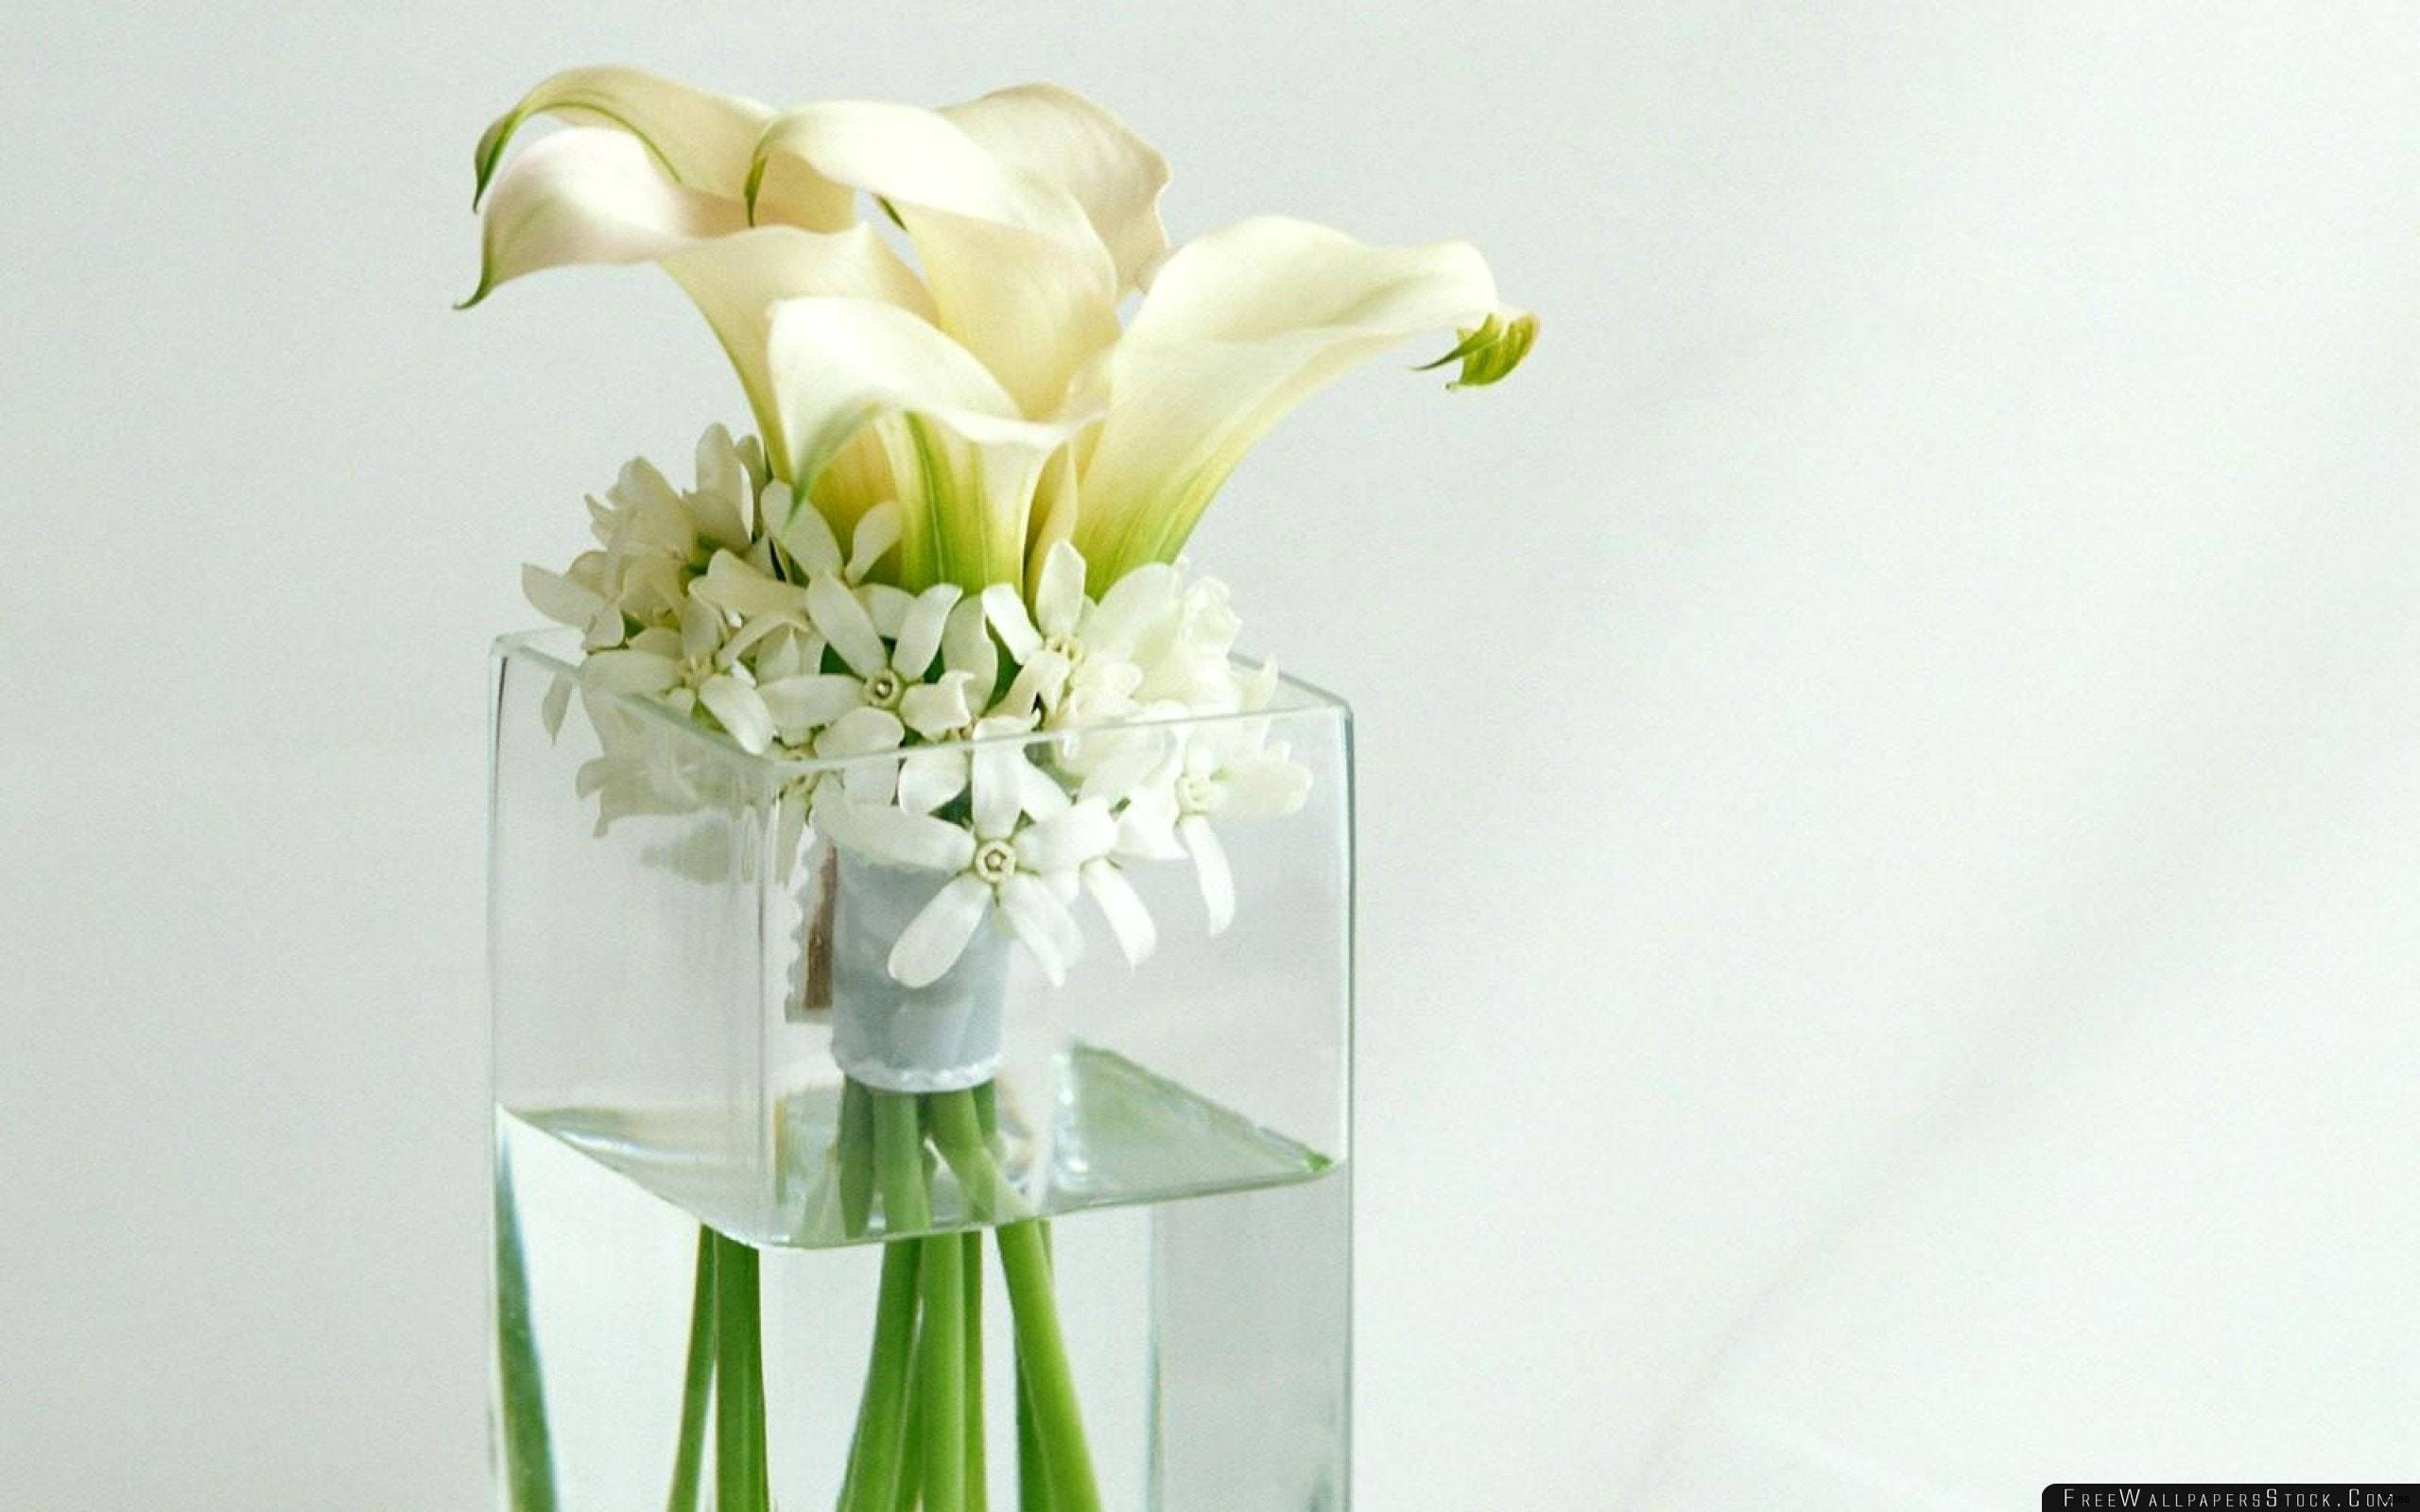 trumpet vases cheap of all white decorating ideas for party simple tall vase centerpiece regarding all white decorating ideas for party simple tall vase centerpiece ideas vases flowers in water 0d